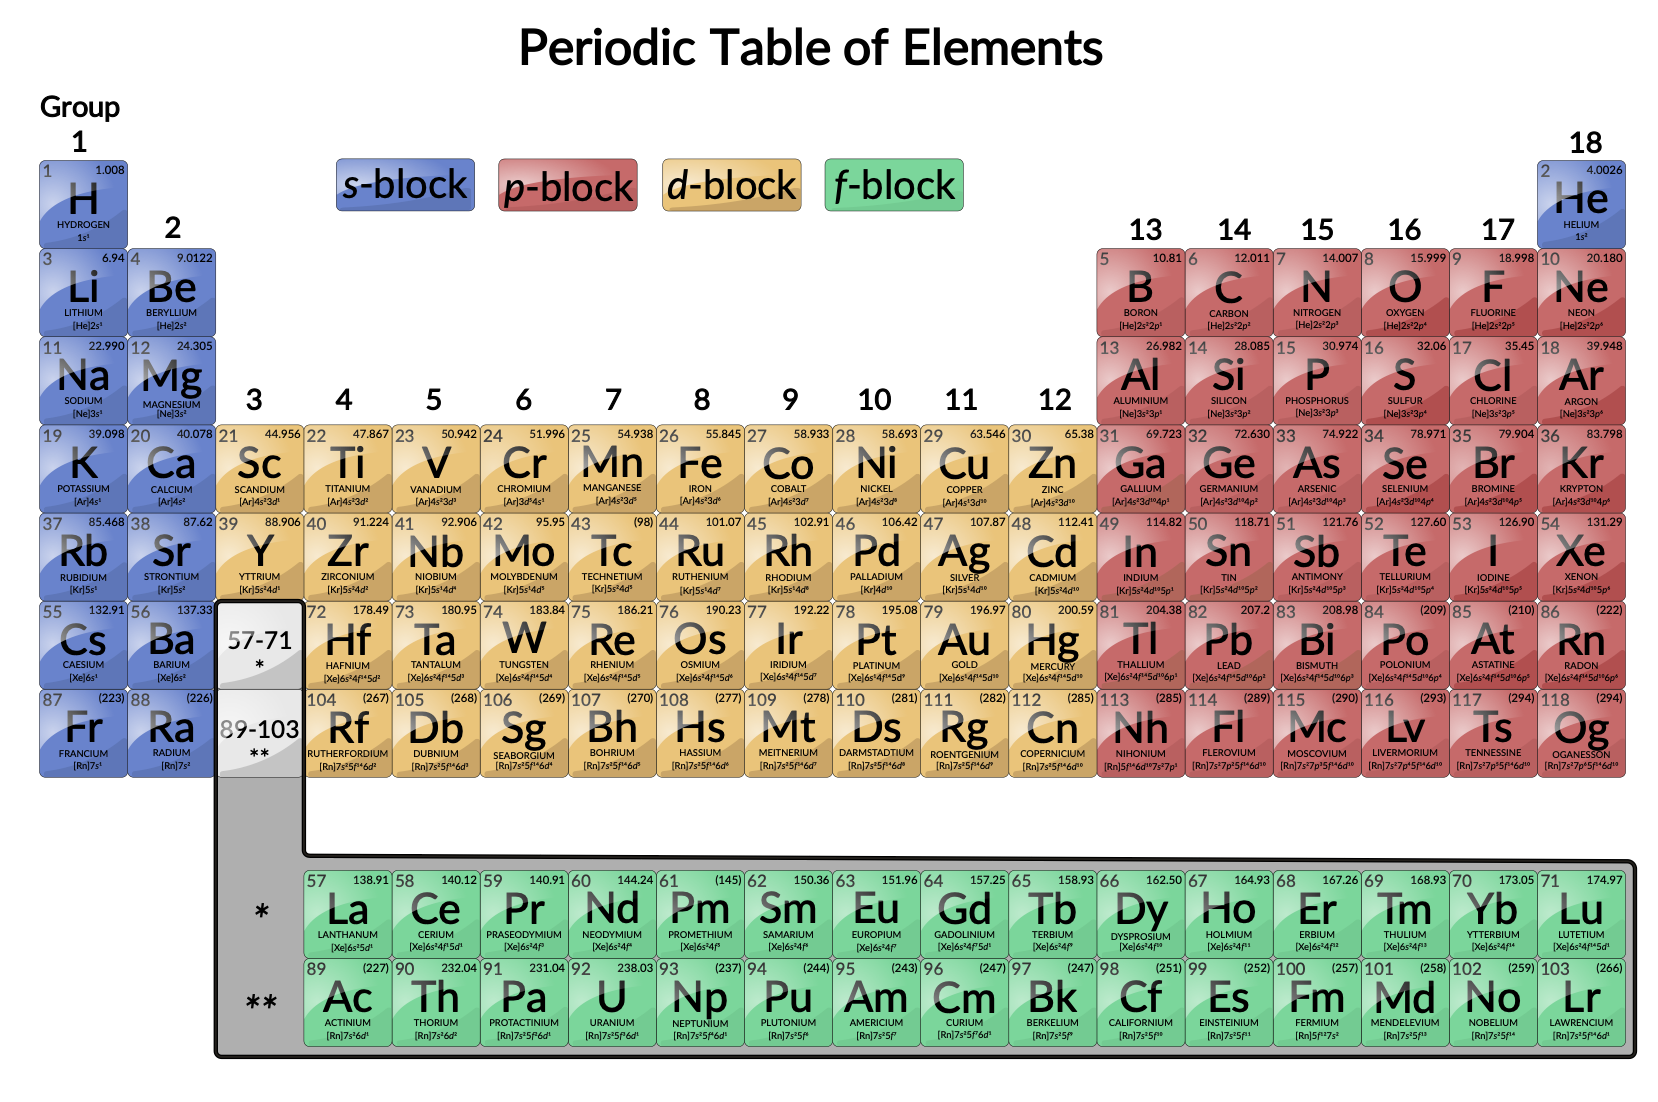 periodic table with ionic charges for transition metals